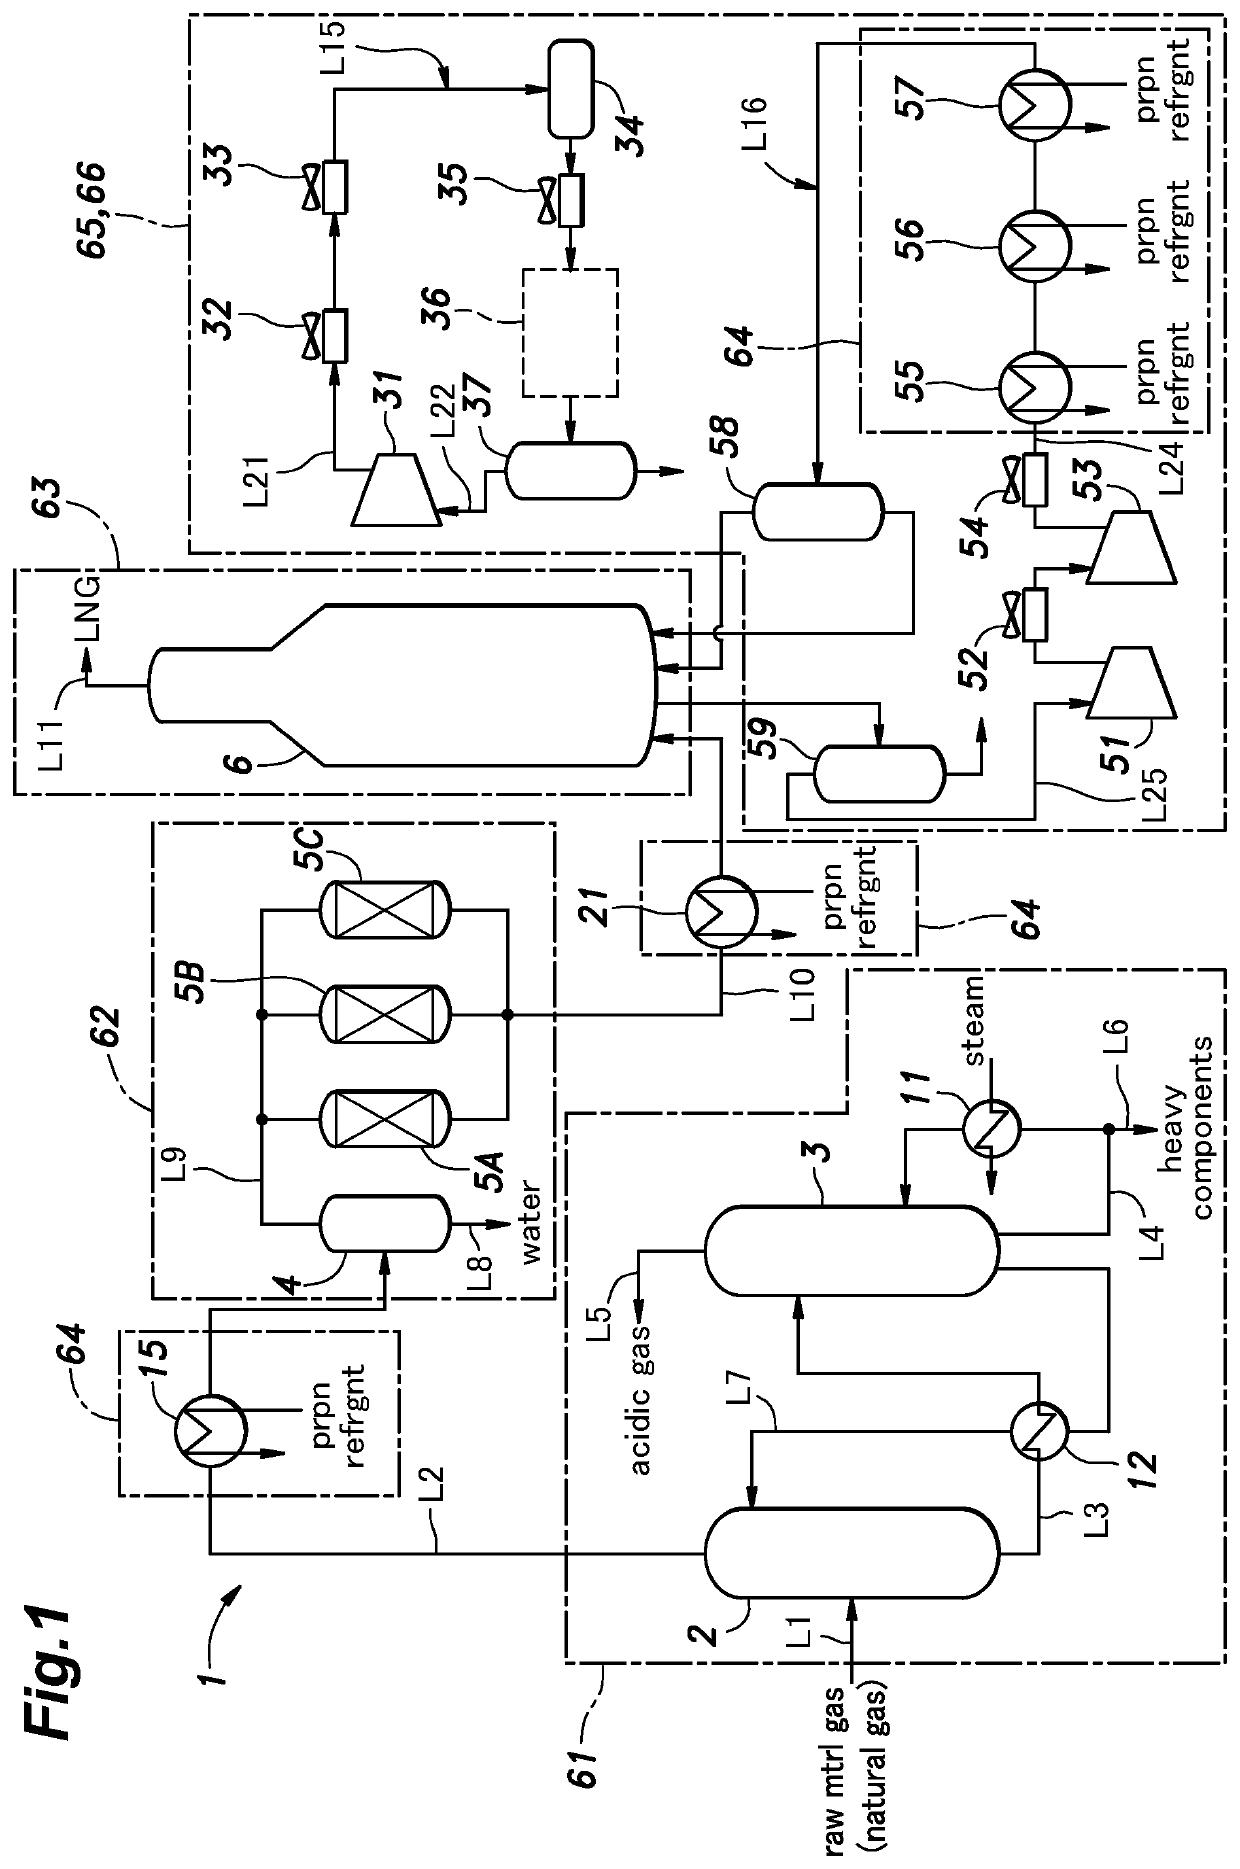 Method for constructing natural gas liquefaction plant